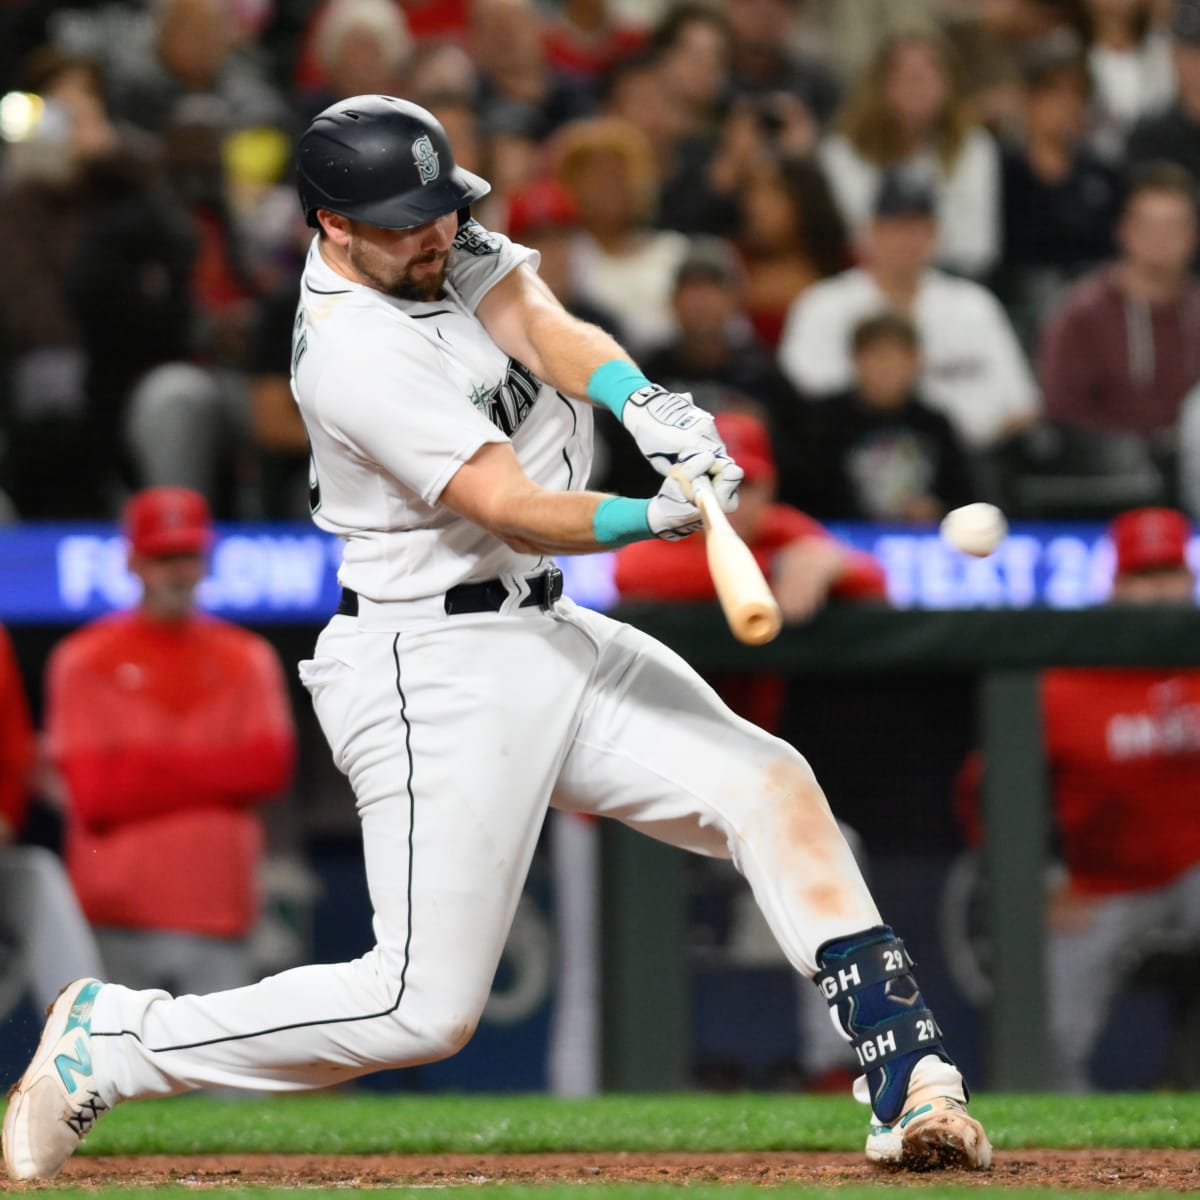 Cal Raleigh Breaks Single-Season Home Run Record For a Seattle Mariners  Catcher - Fastball